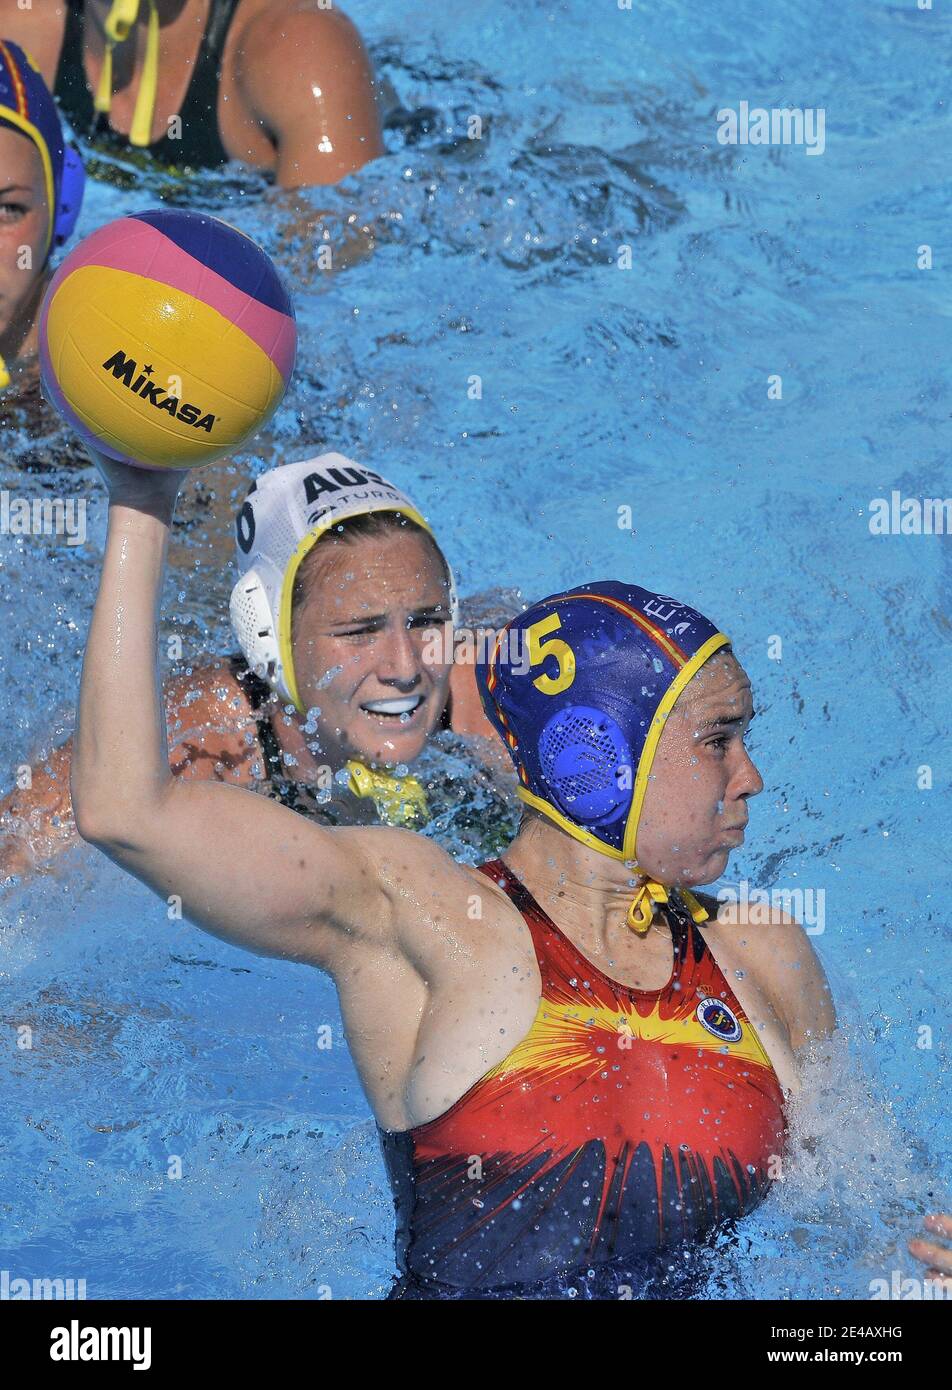 Italy edges U.S. women's water polo team at worlds, ends five-peat